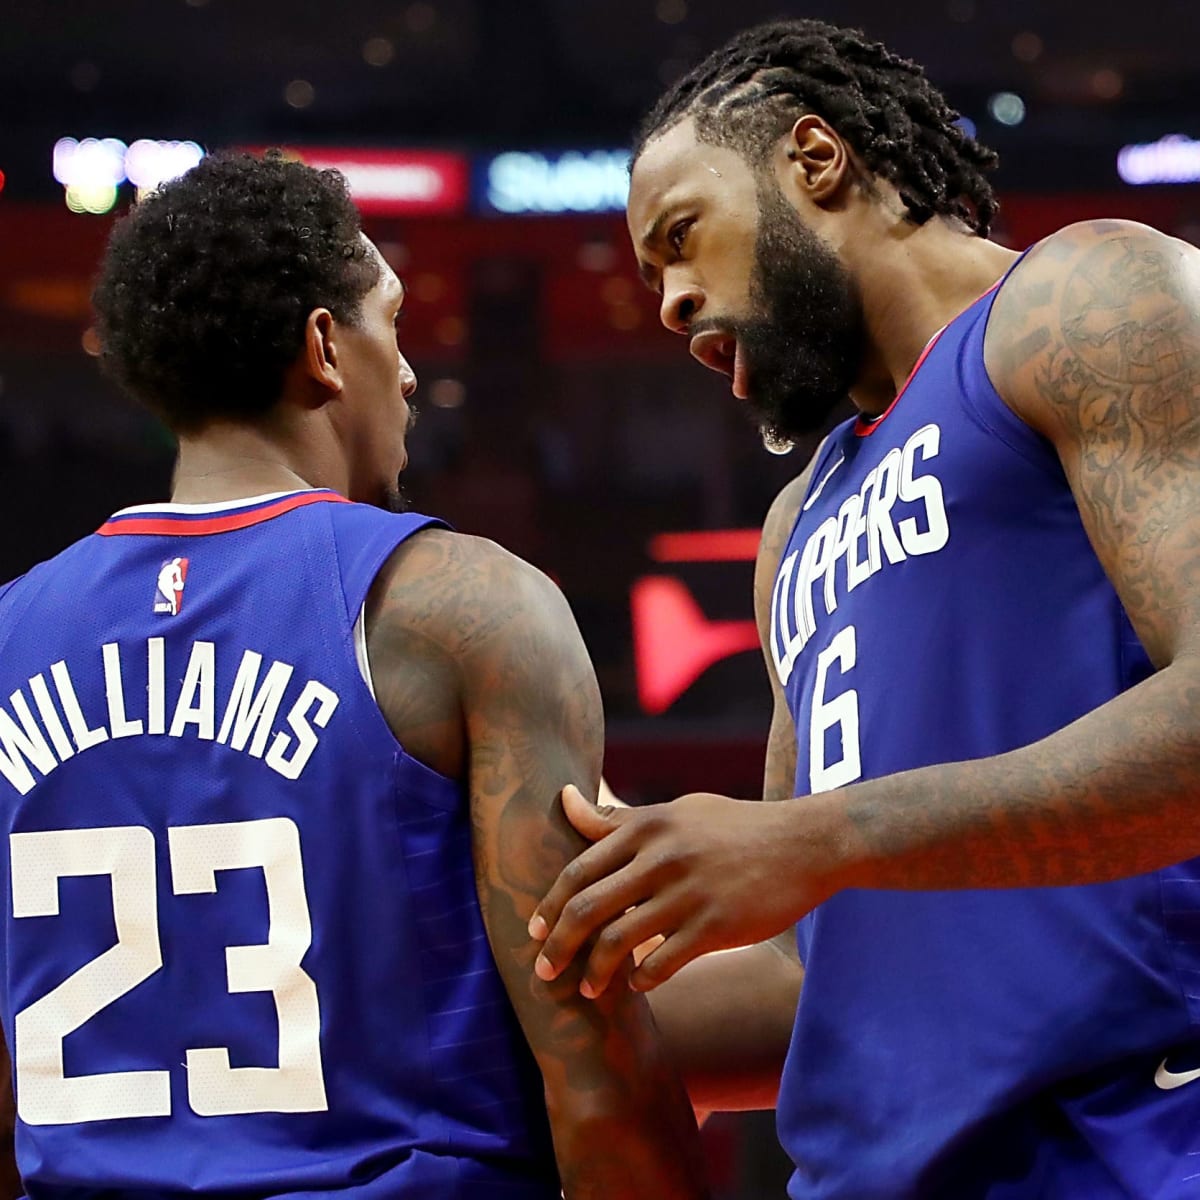 Big man DeAndre Jordan leaves Sixers to join Nuggets in free agency